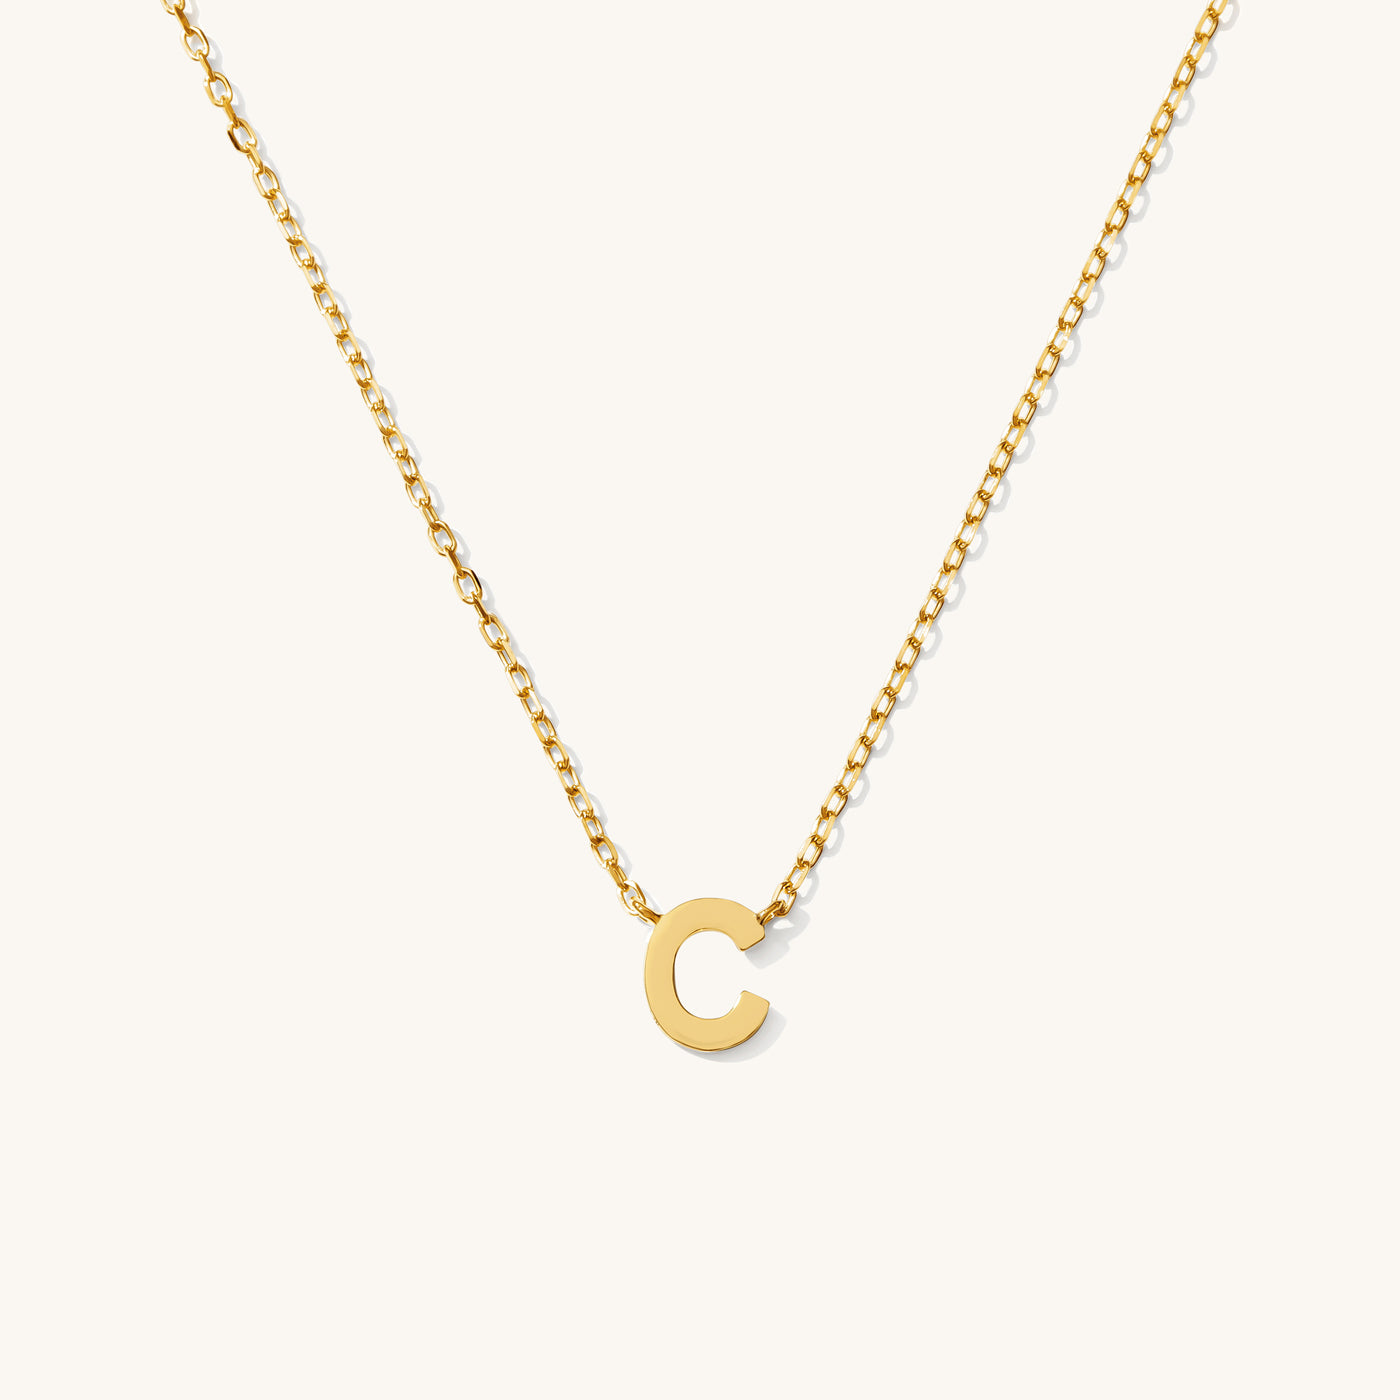 C Tiny Initial Necklace - 14k Solid Gold